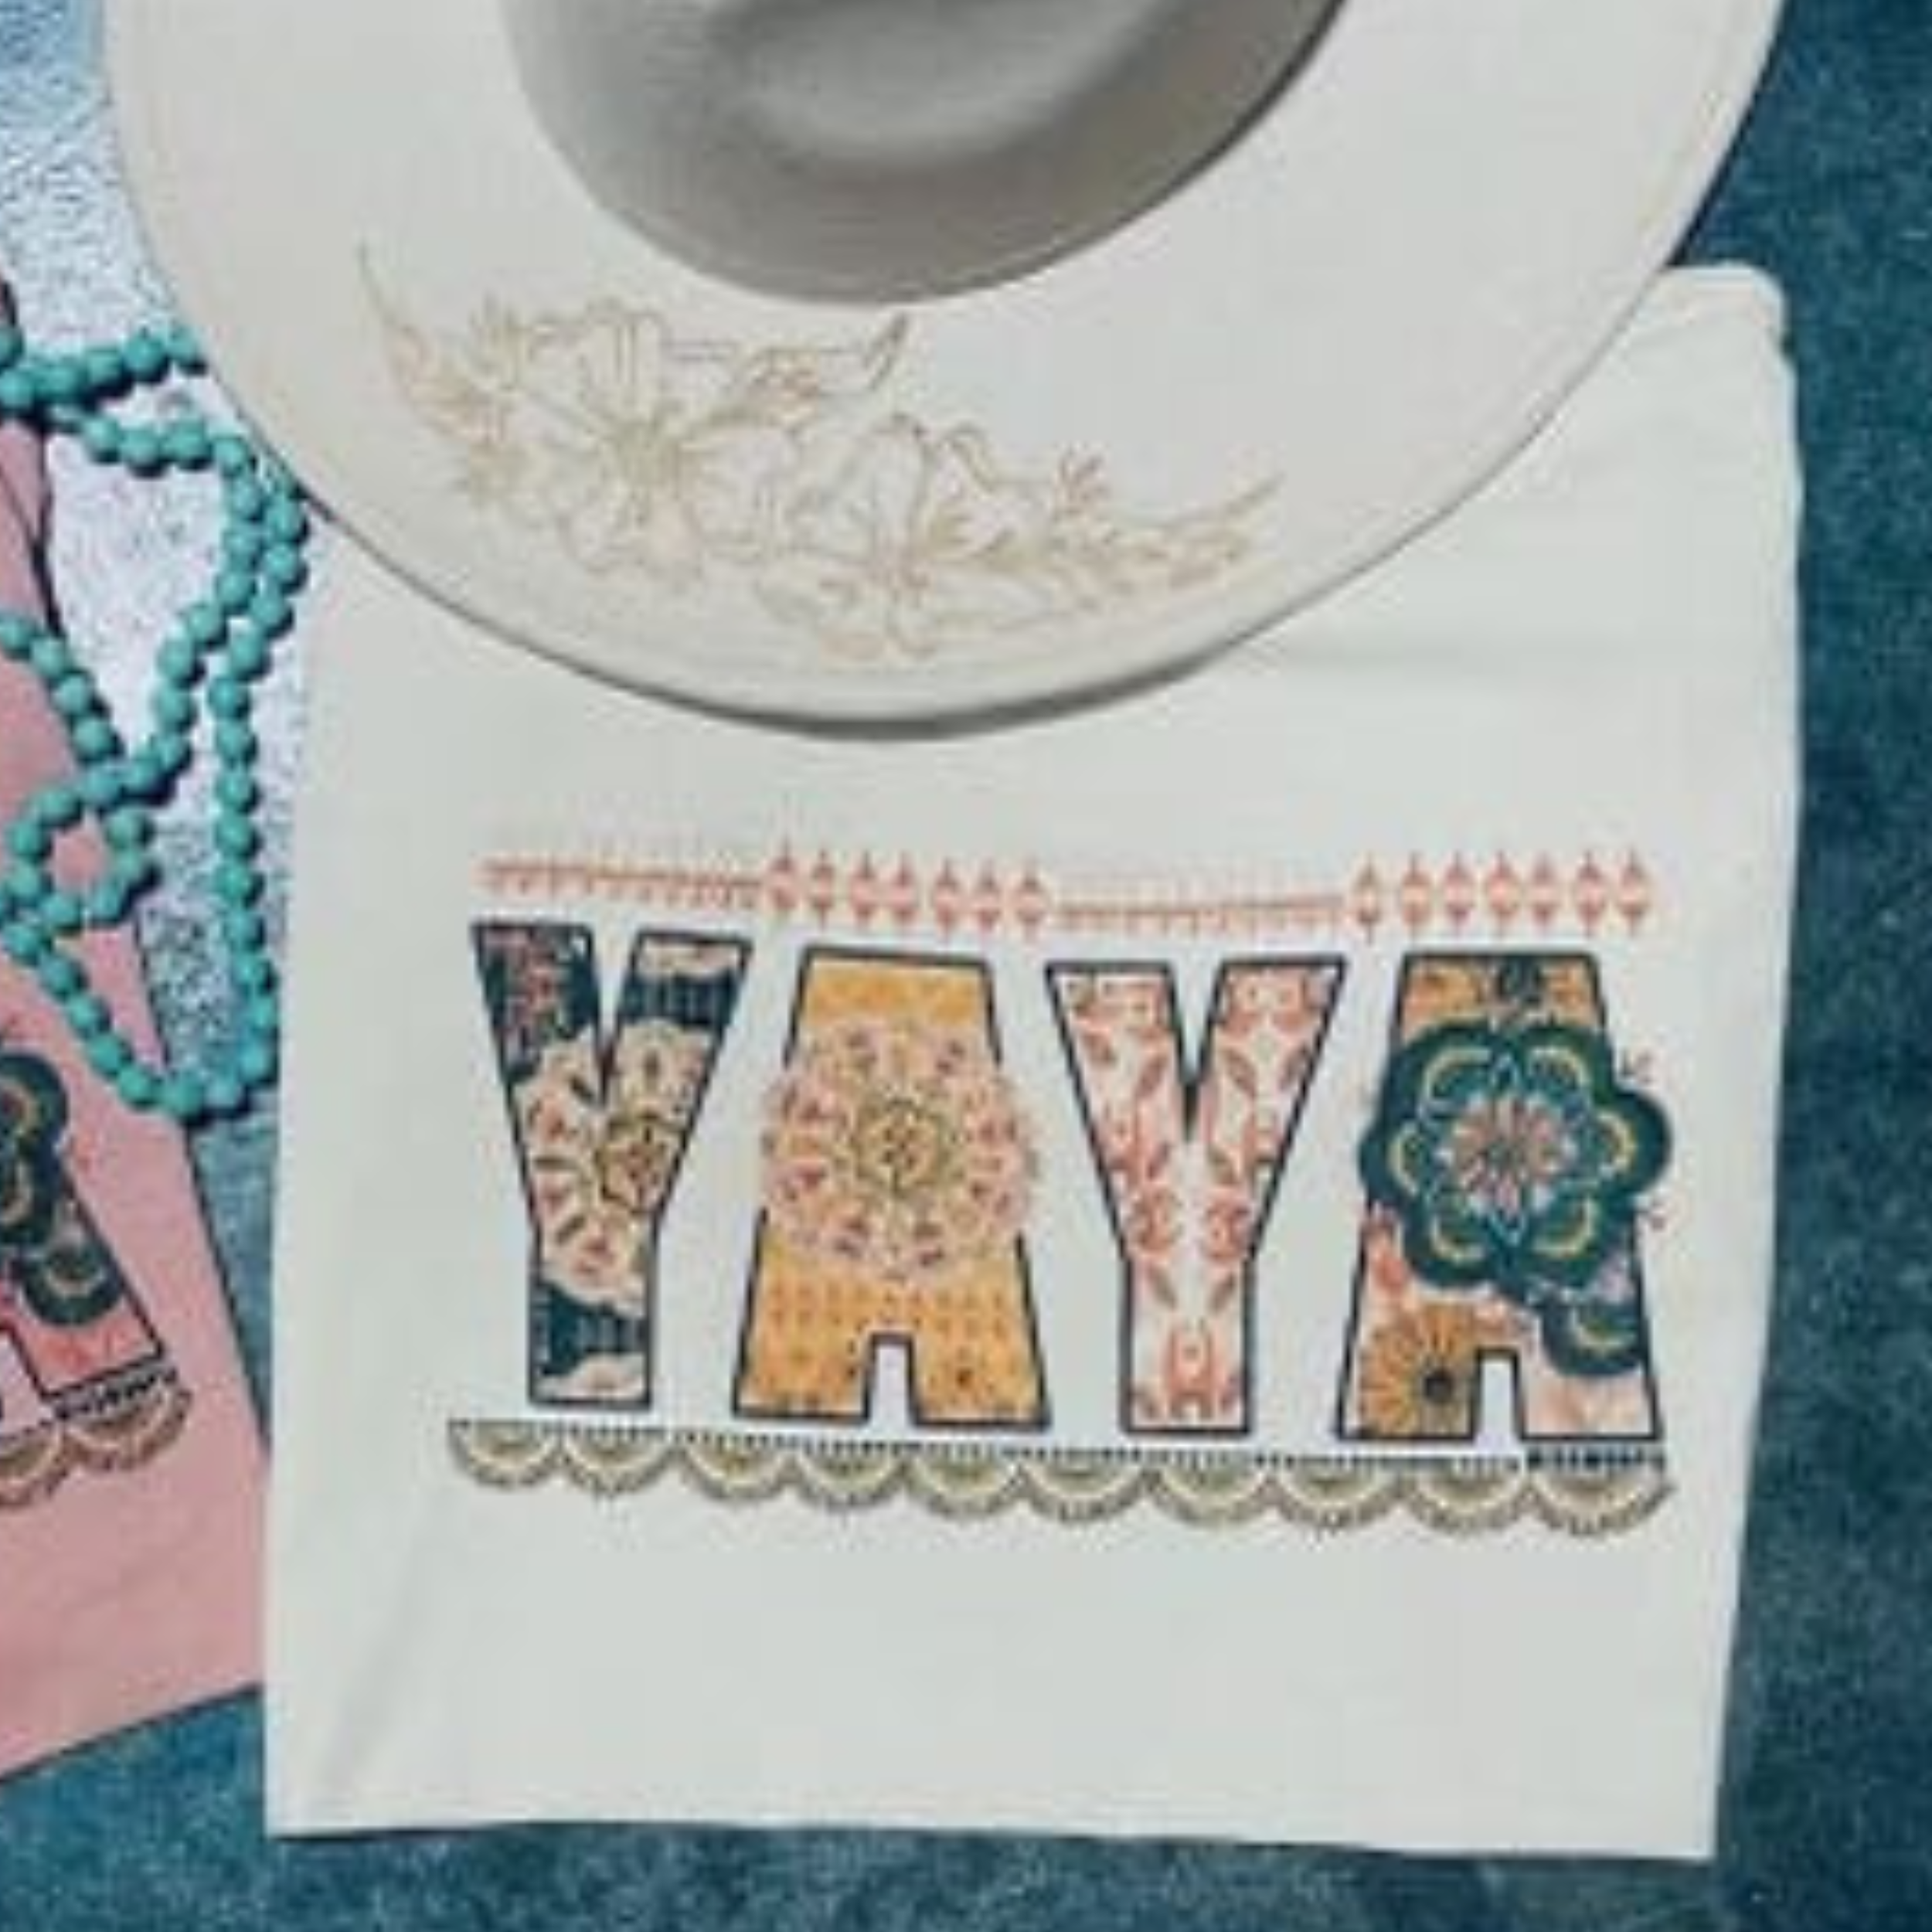 A white short sleeve tee with the word "YAYA" in the center. Each letter has its own unique pattern and color. There is a scalloped border below the text and a line border above. Item is pictured on a simple turquoise background.